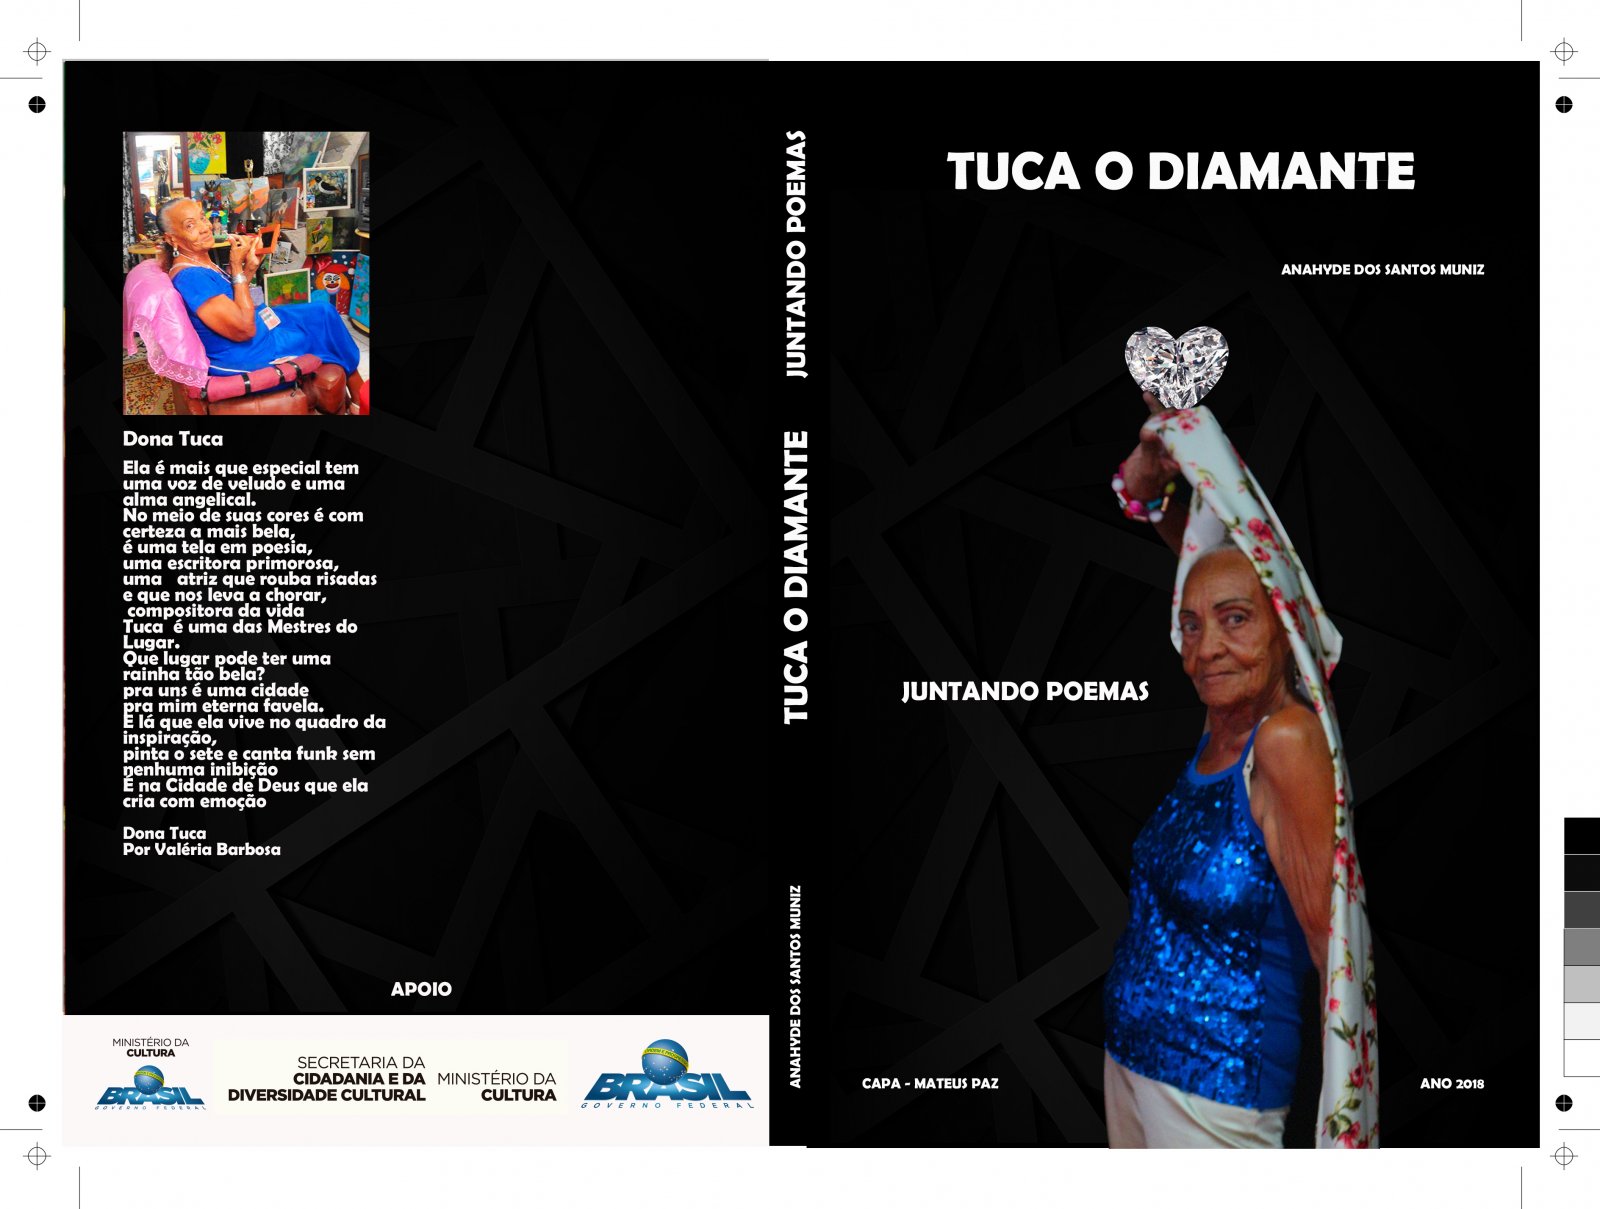 First book by Dona Tuca and my first book produced.